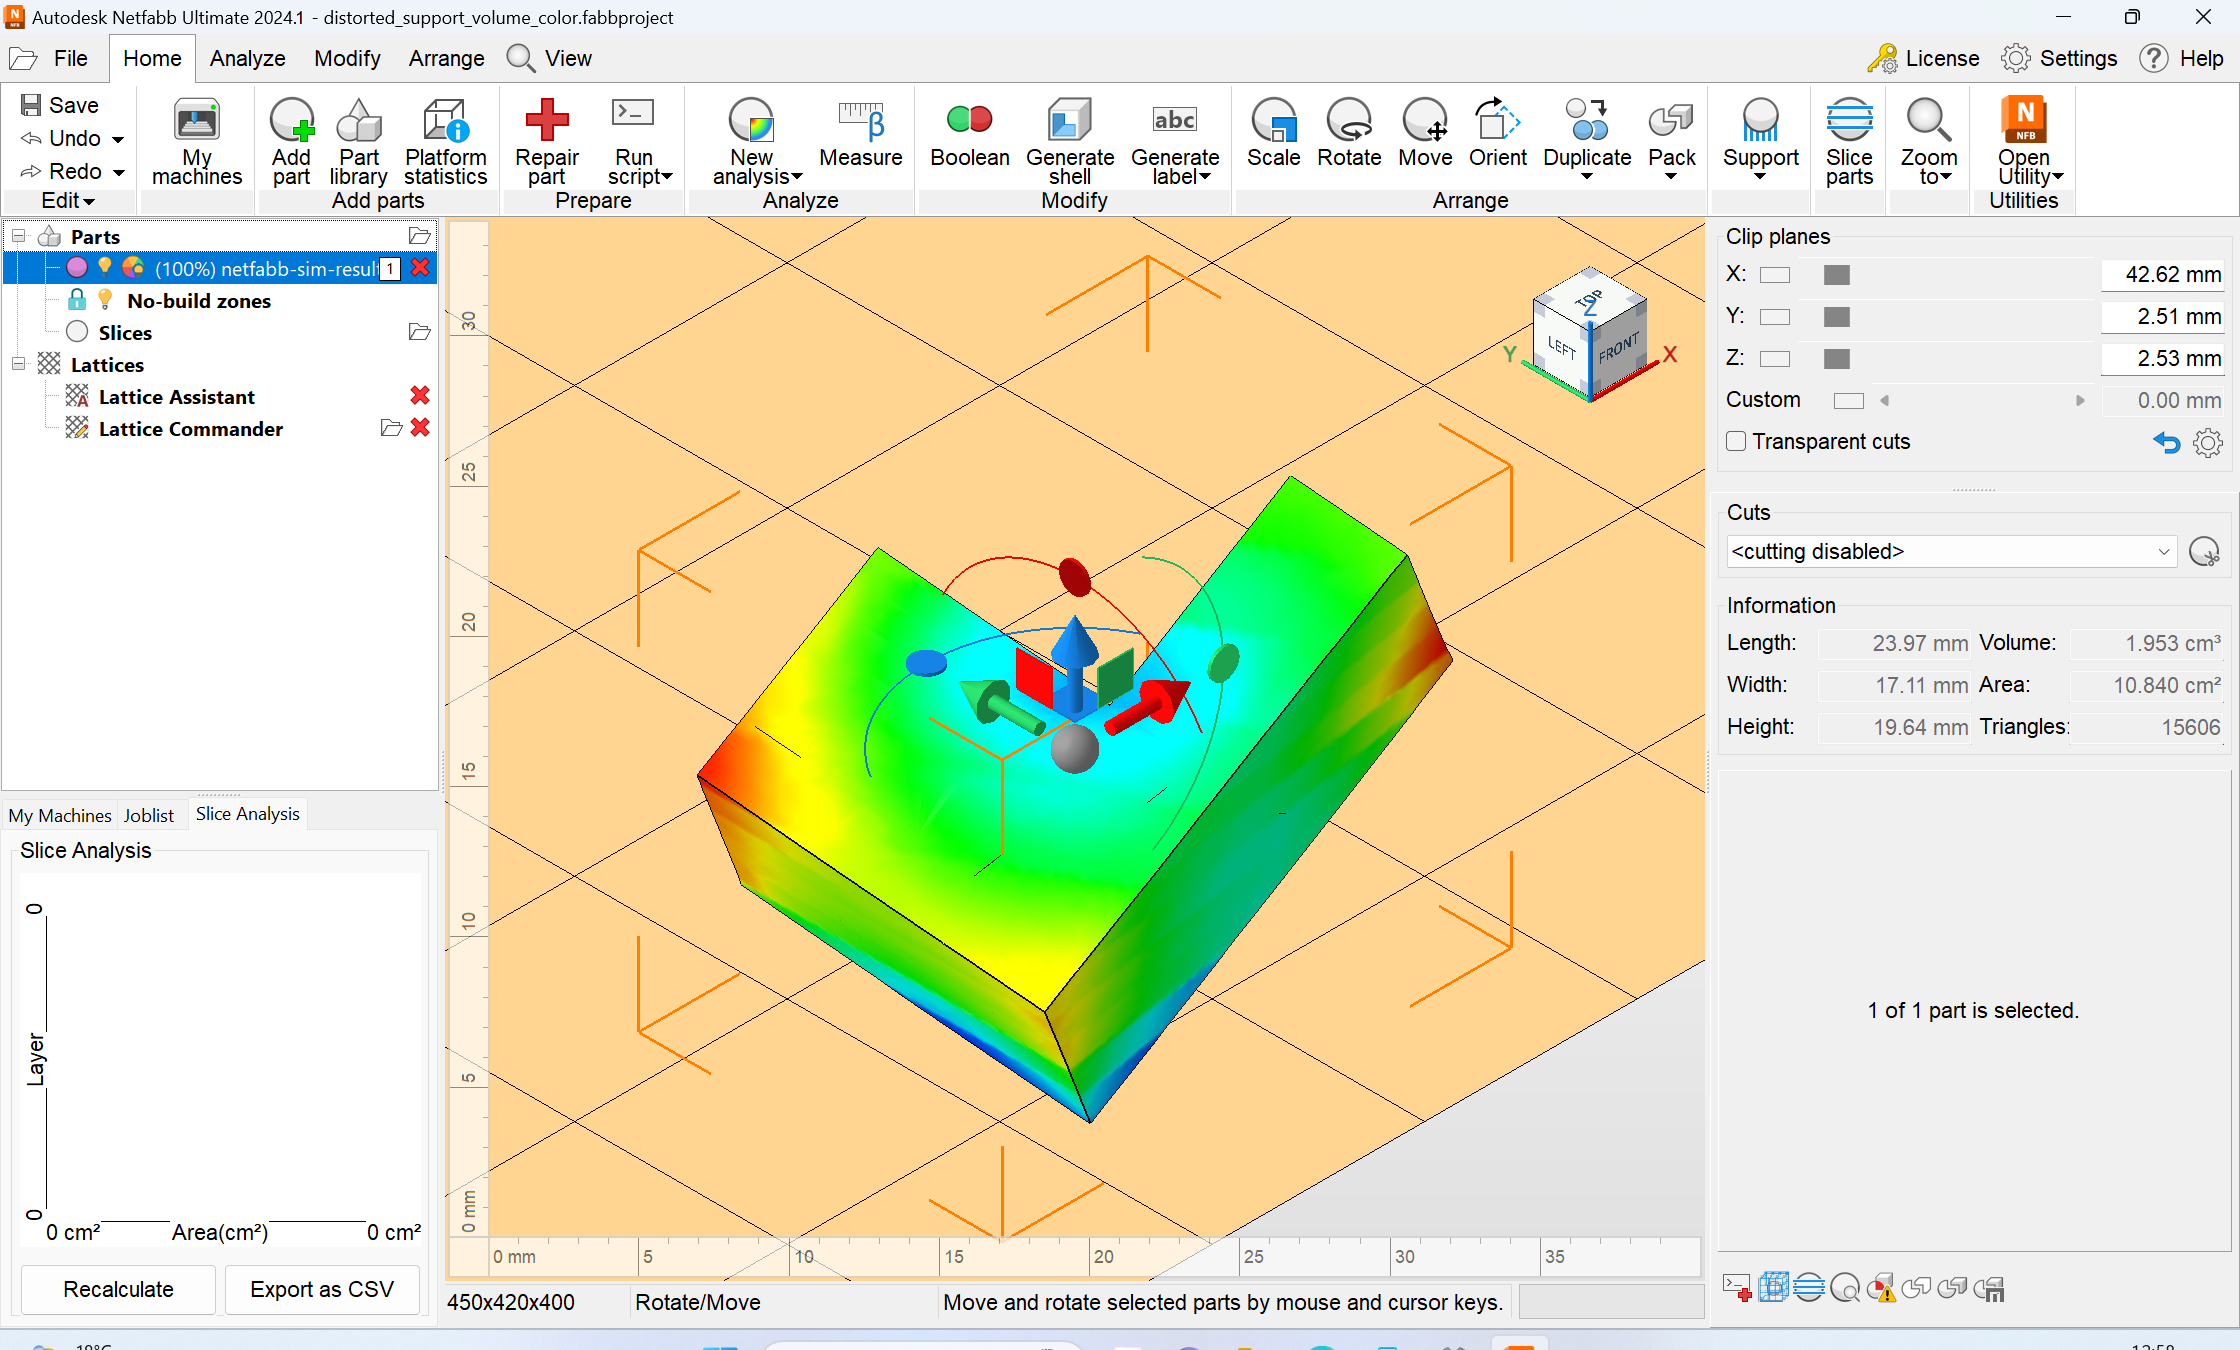 Working with Autodesk Netfabb Ultimate 2024.124 full license